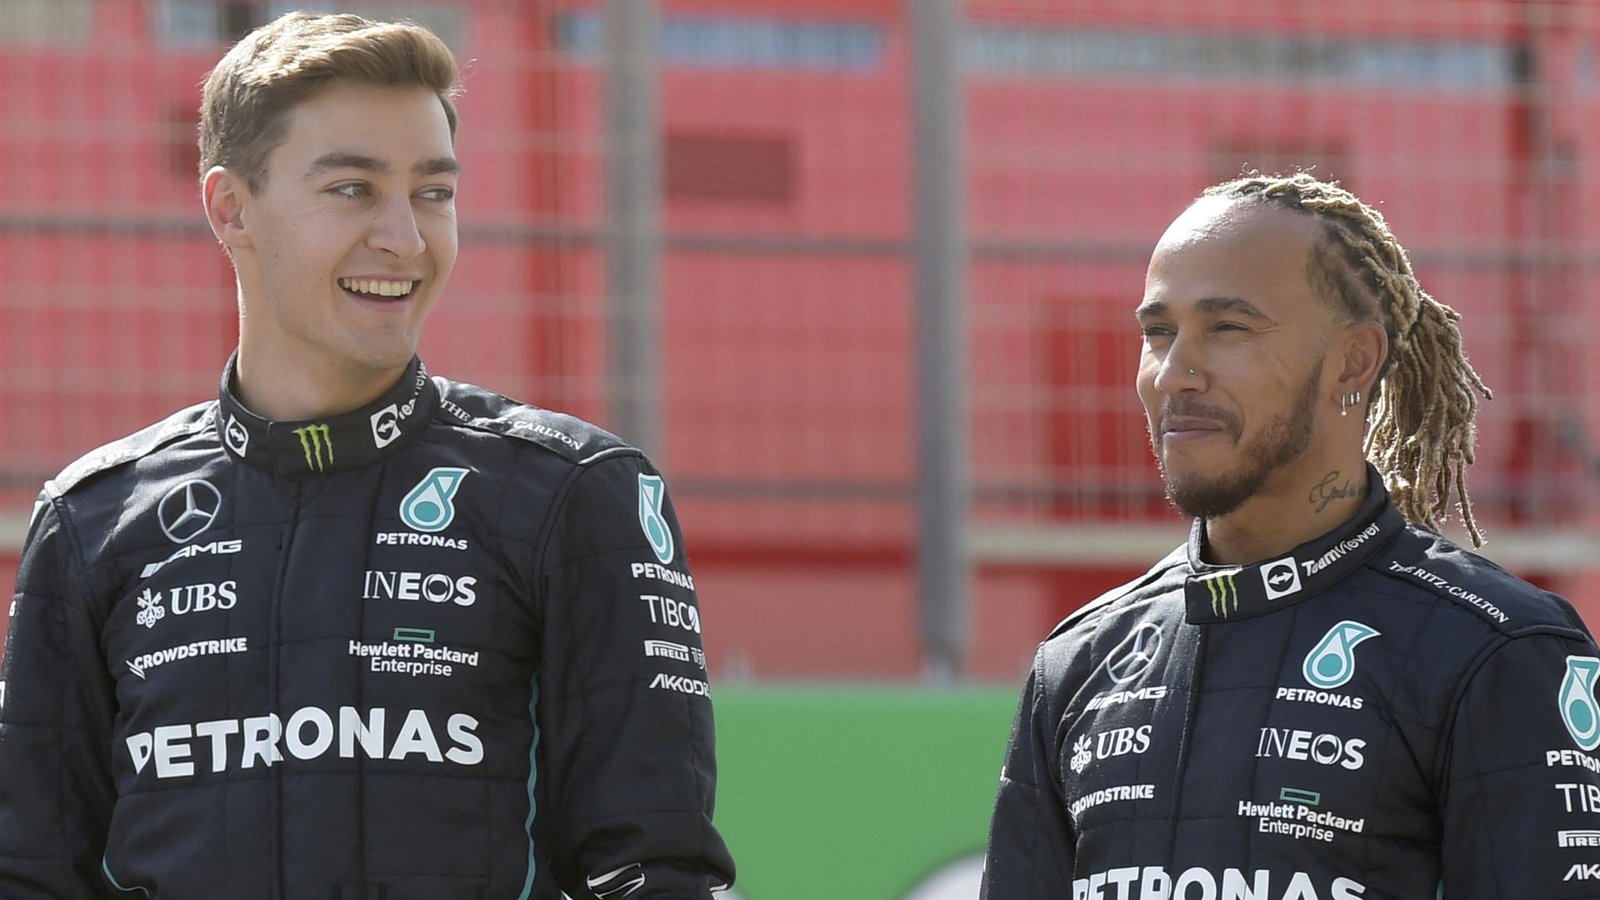 George Russels and Lewis Hamilton